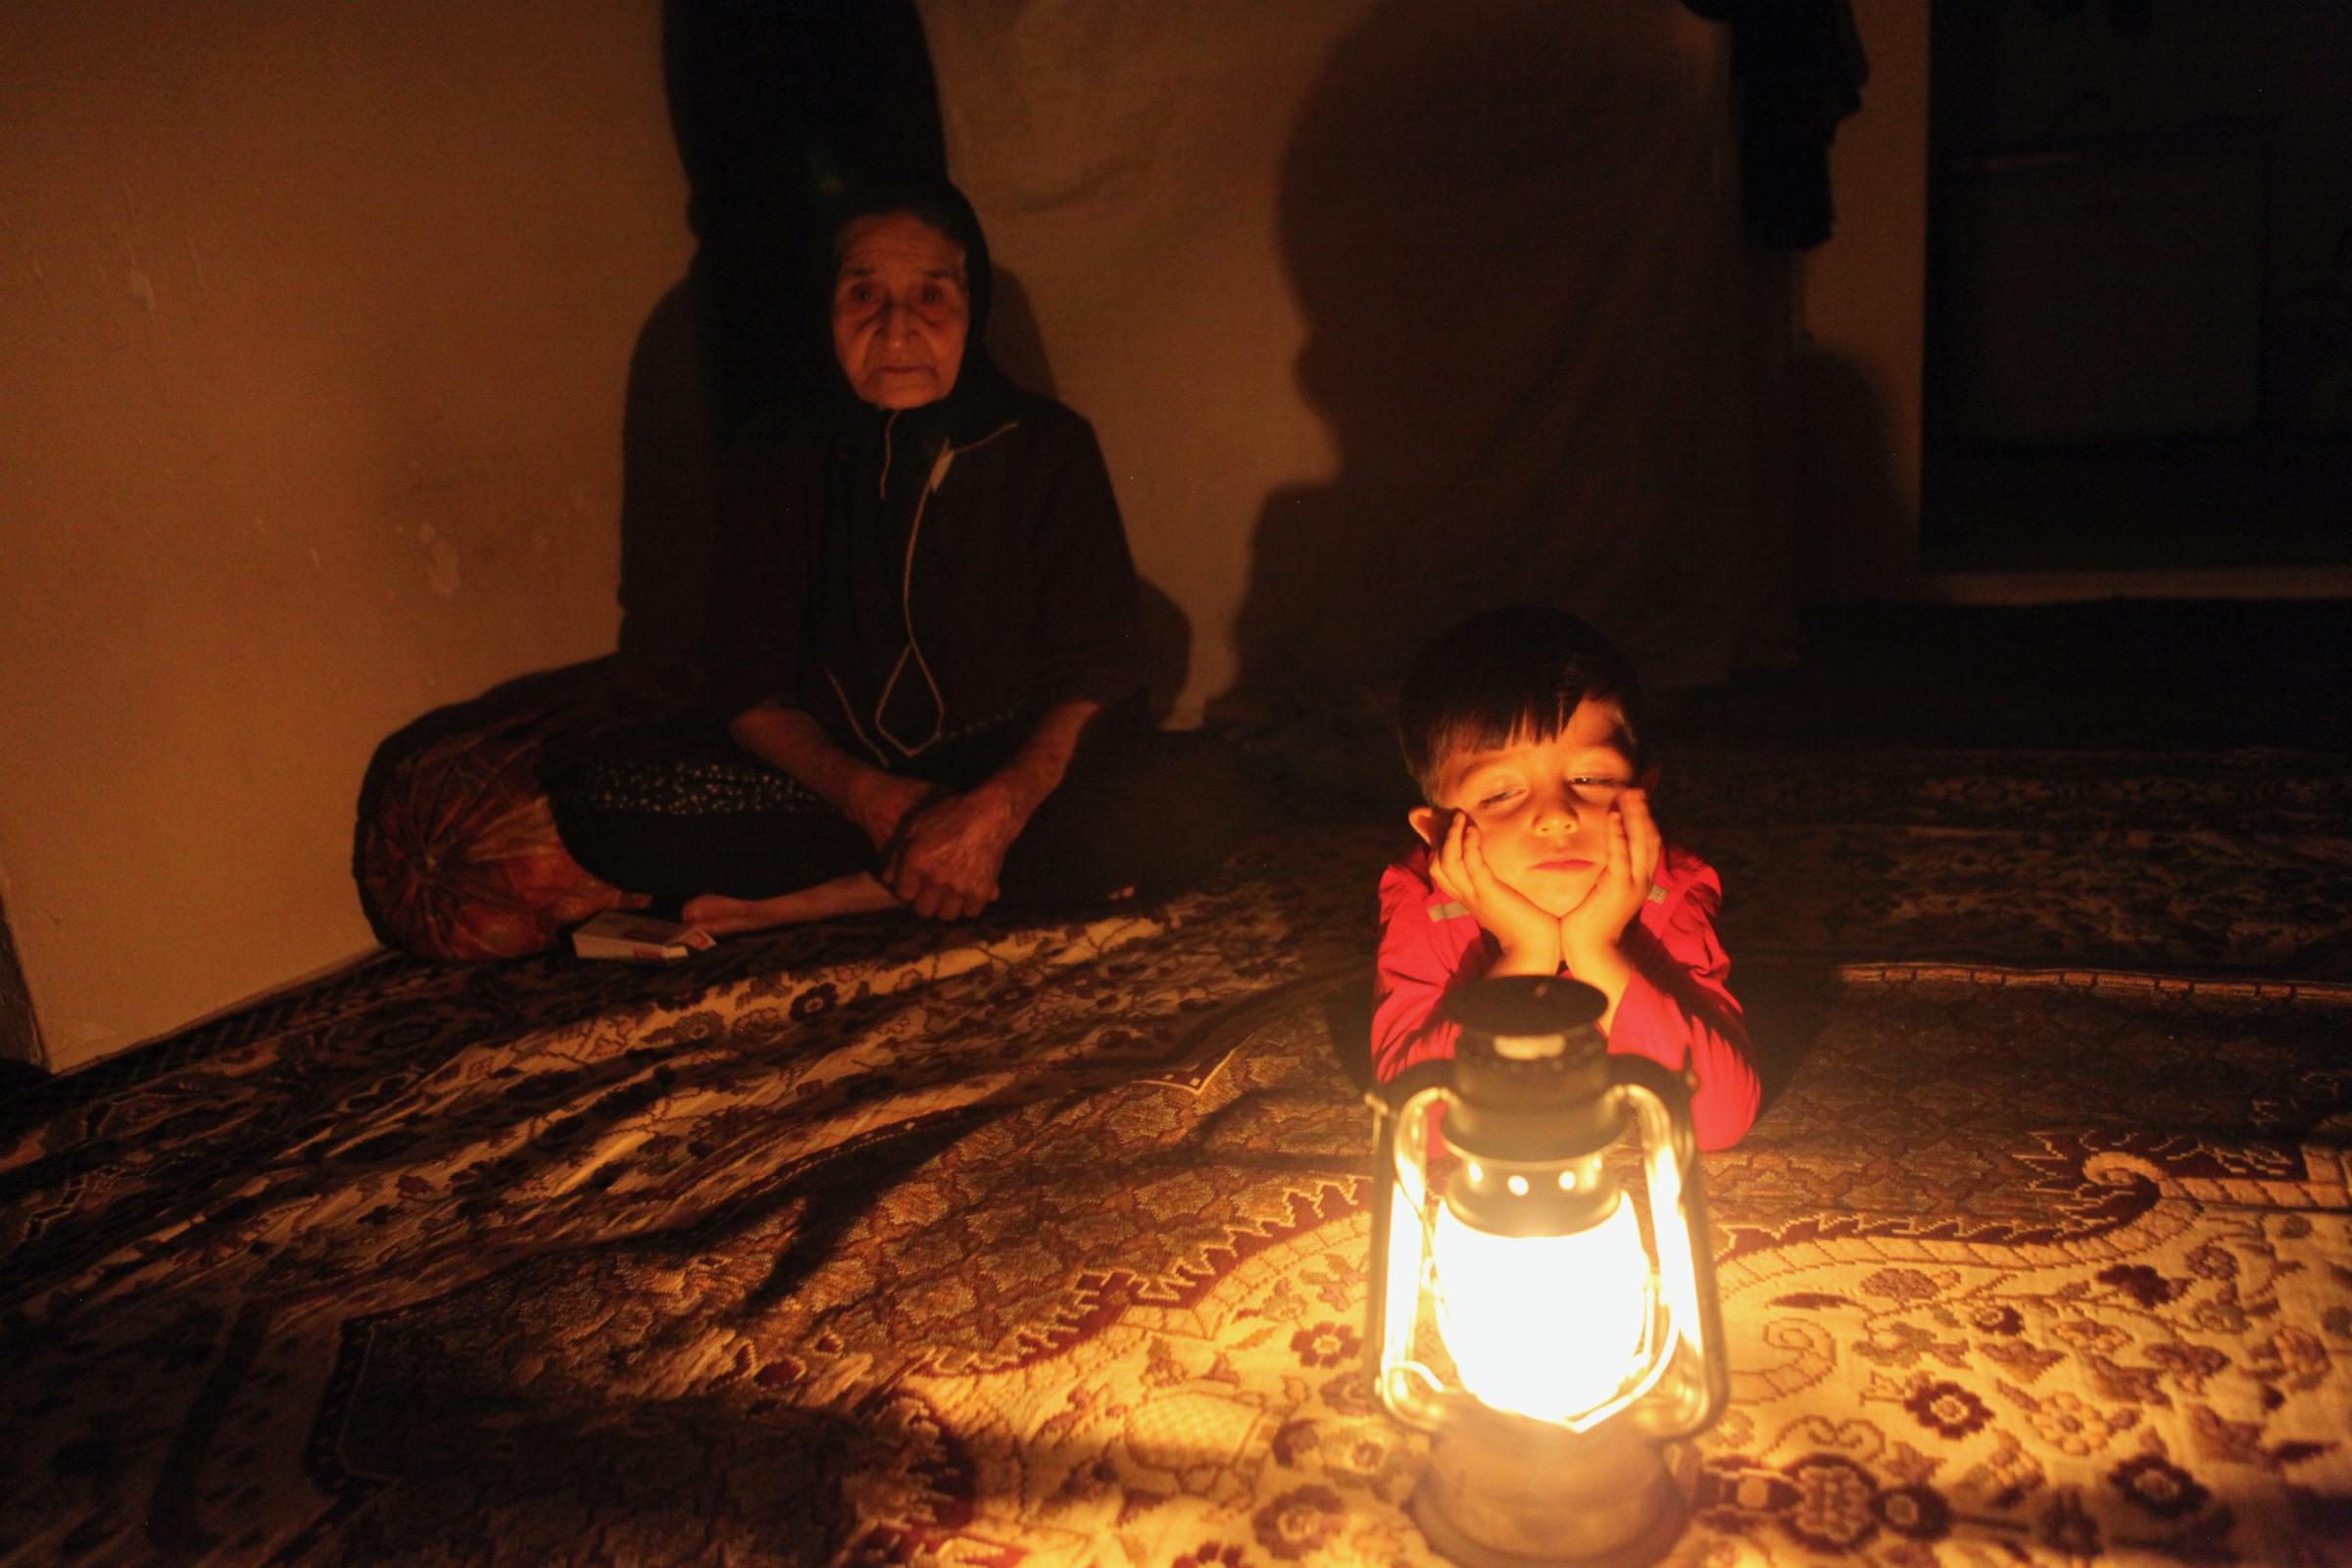 When The Rain Is Dry - The grandmother and the grandson are sitting in darkness...